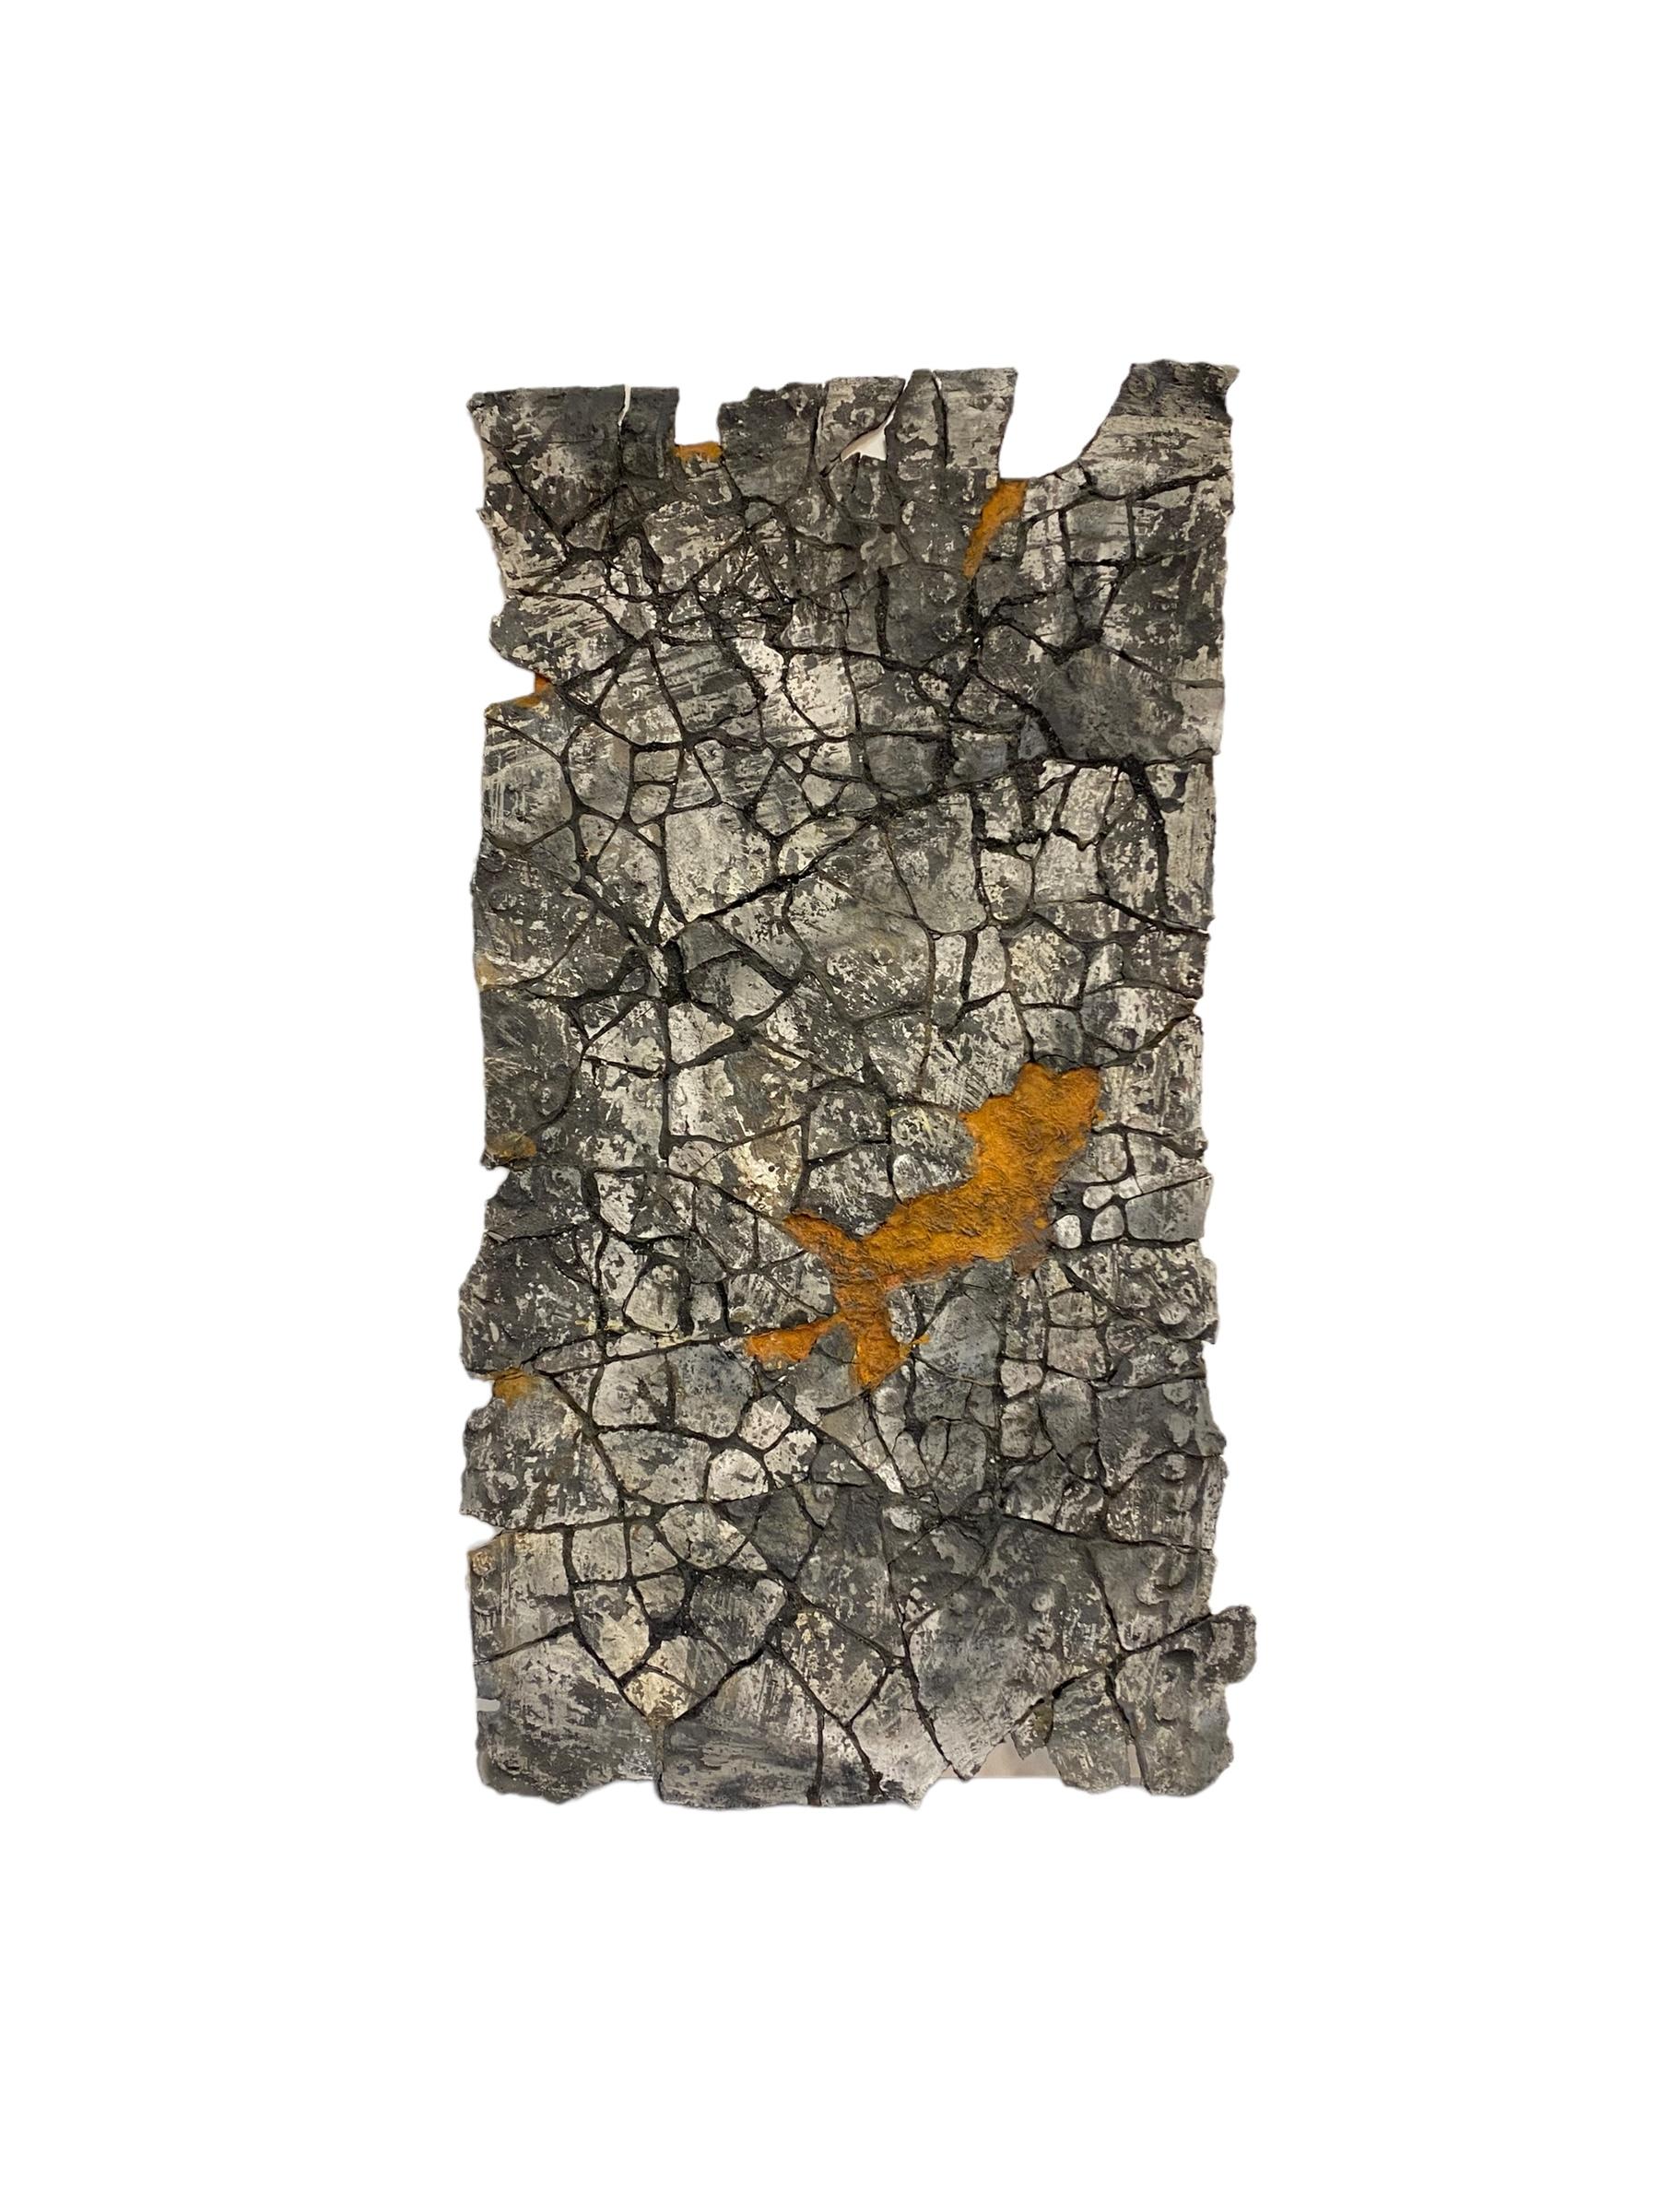 Hand-Crafted 'Brittle Moment' A Unique Ceramic Wall Sculpture, Pekka Paikkari, 2015 For Sale